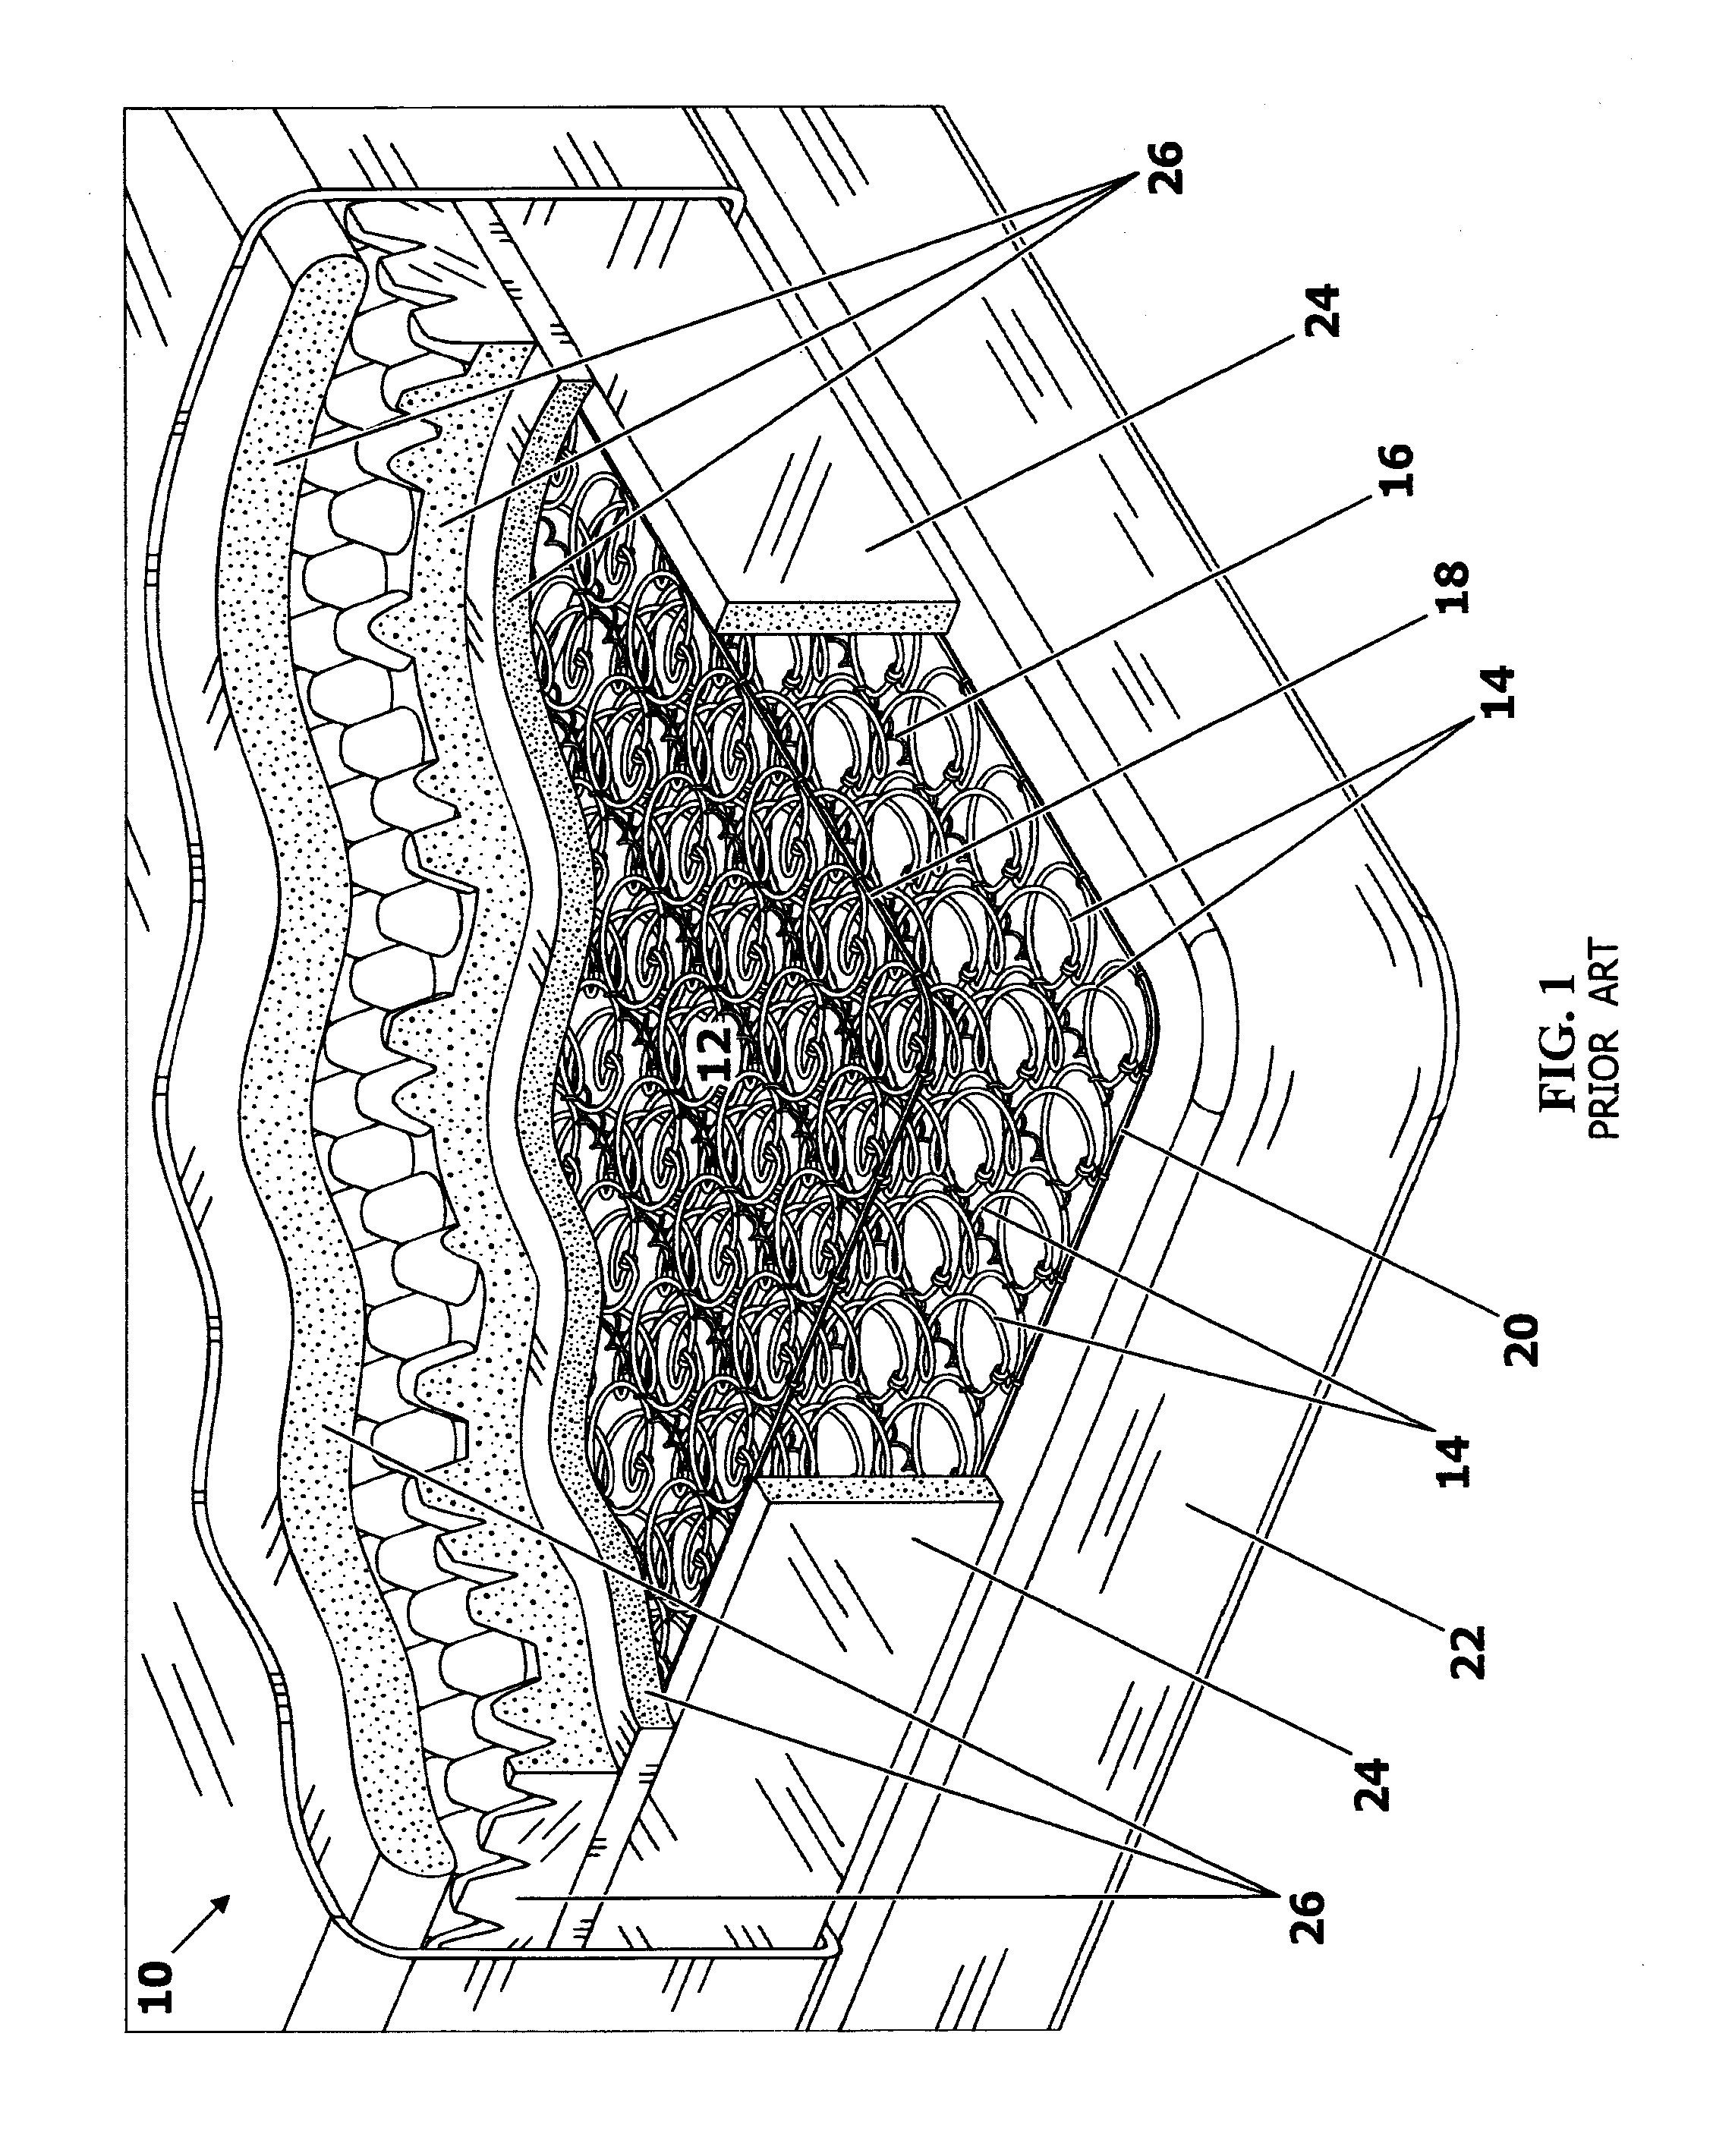 Stepped-edge and side-support members, assemblies, systems, and related methods, particularly for bedding and seating